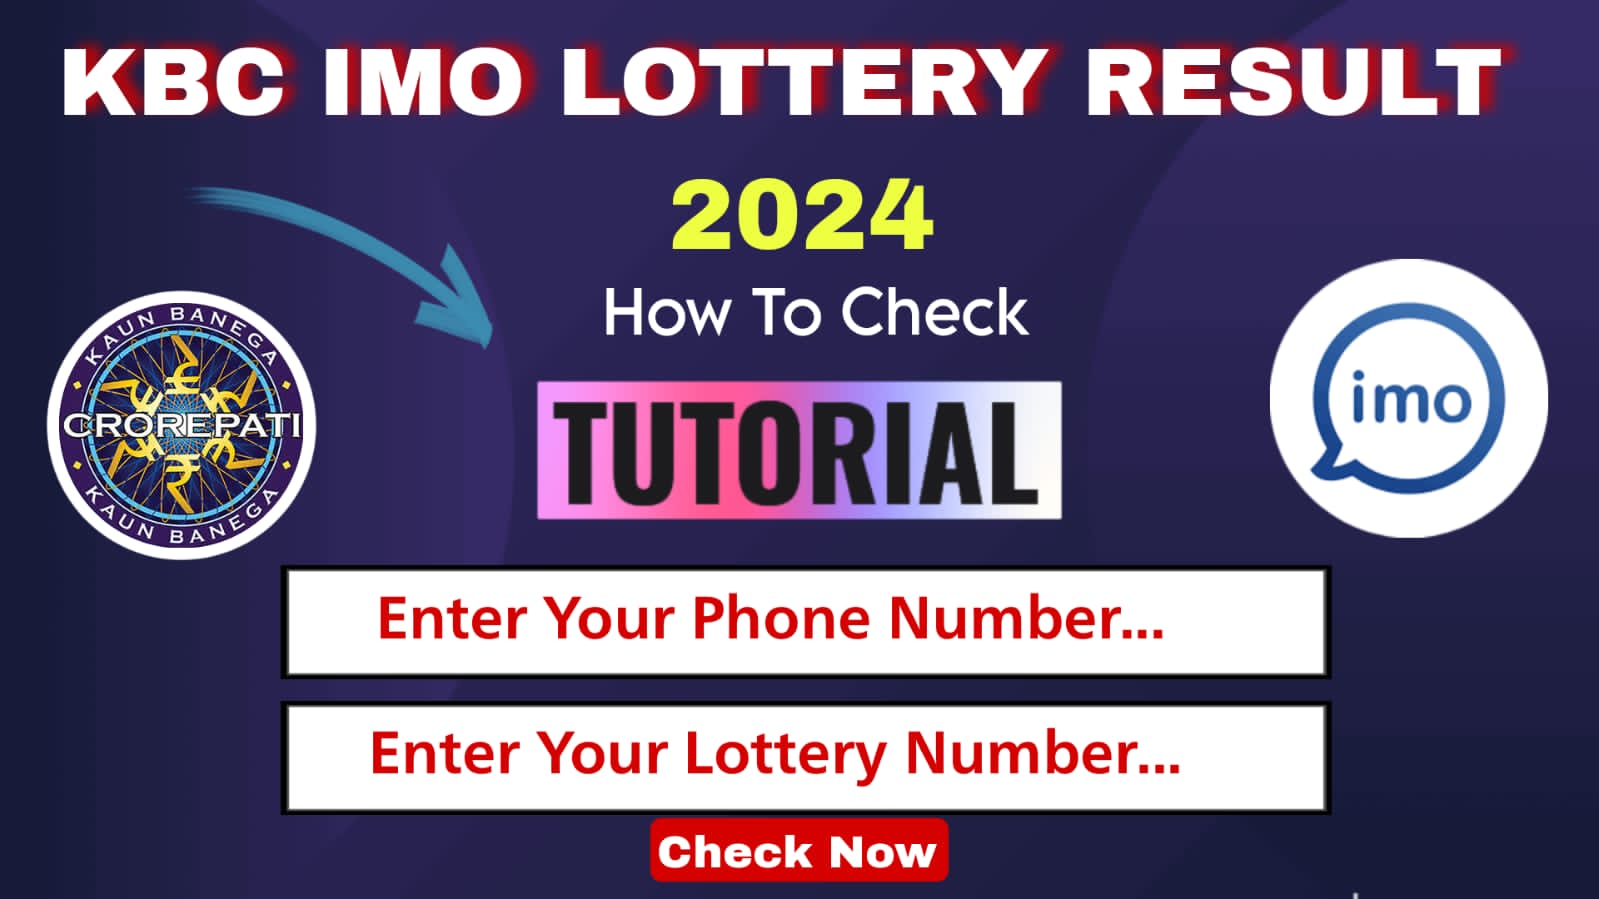  kbc check lottery online,kbc check lottery,kbc online lottery,kbc check lottery online 2024,check kbc lottery online 